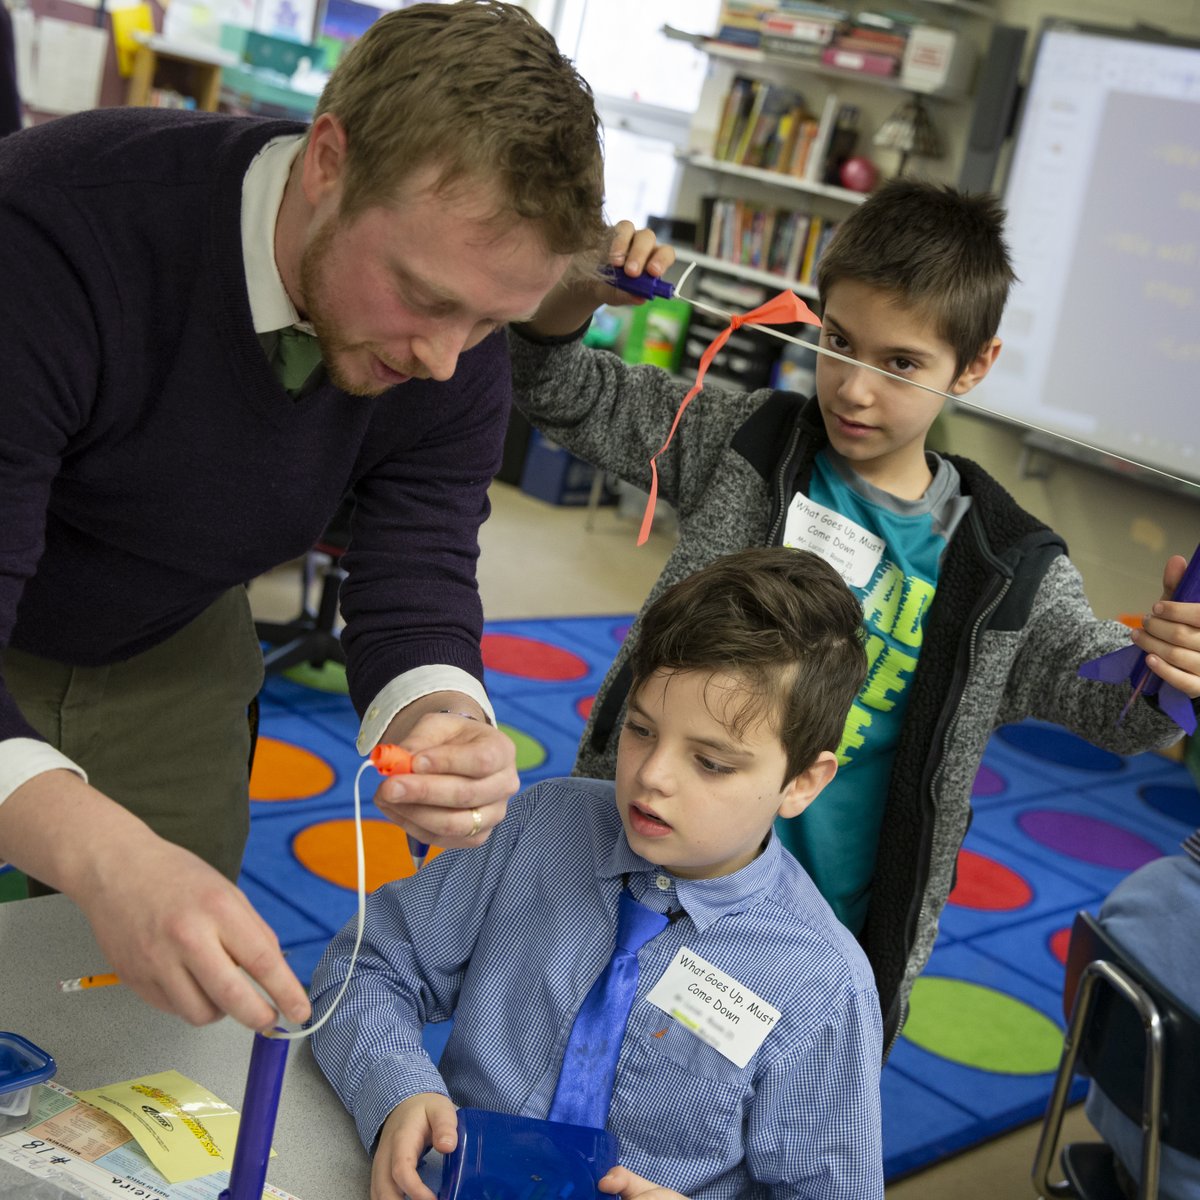 Happy #TeacherAppreciationWeek to all #RhodeIsland teachers! Thank you for your crucial work to support our state’s students and, ultimately, our state’s future.